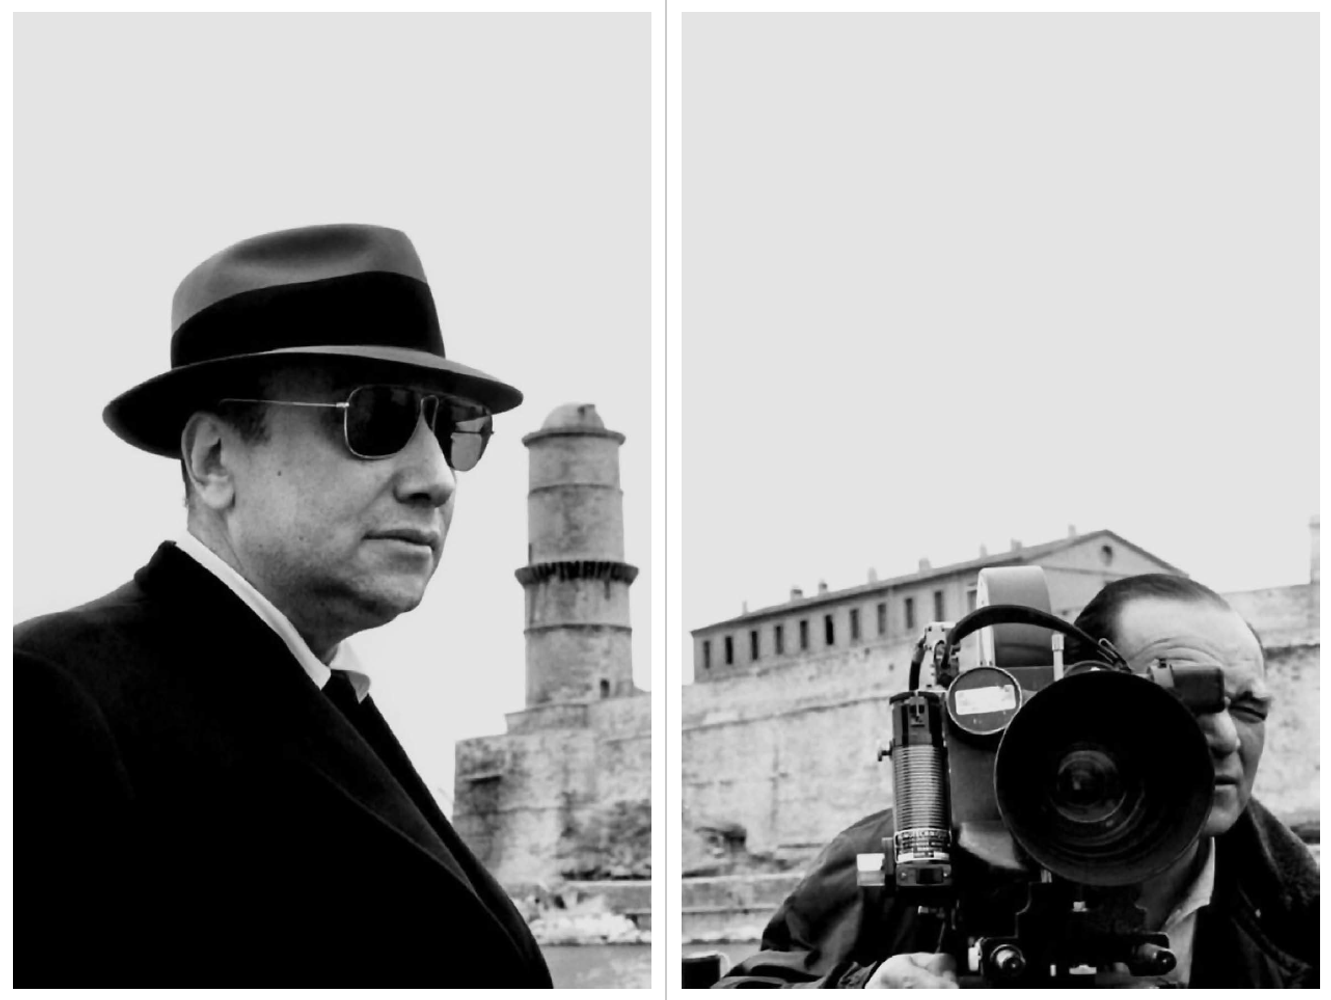 Honor Among Thieves: The Cinema of Jean-Pierre Melville